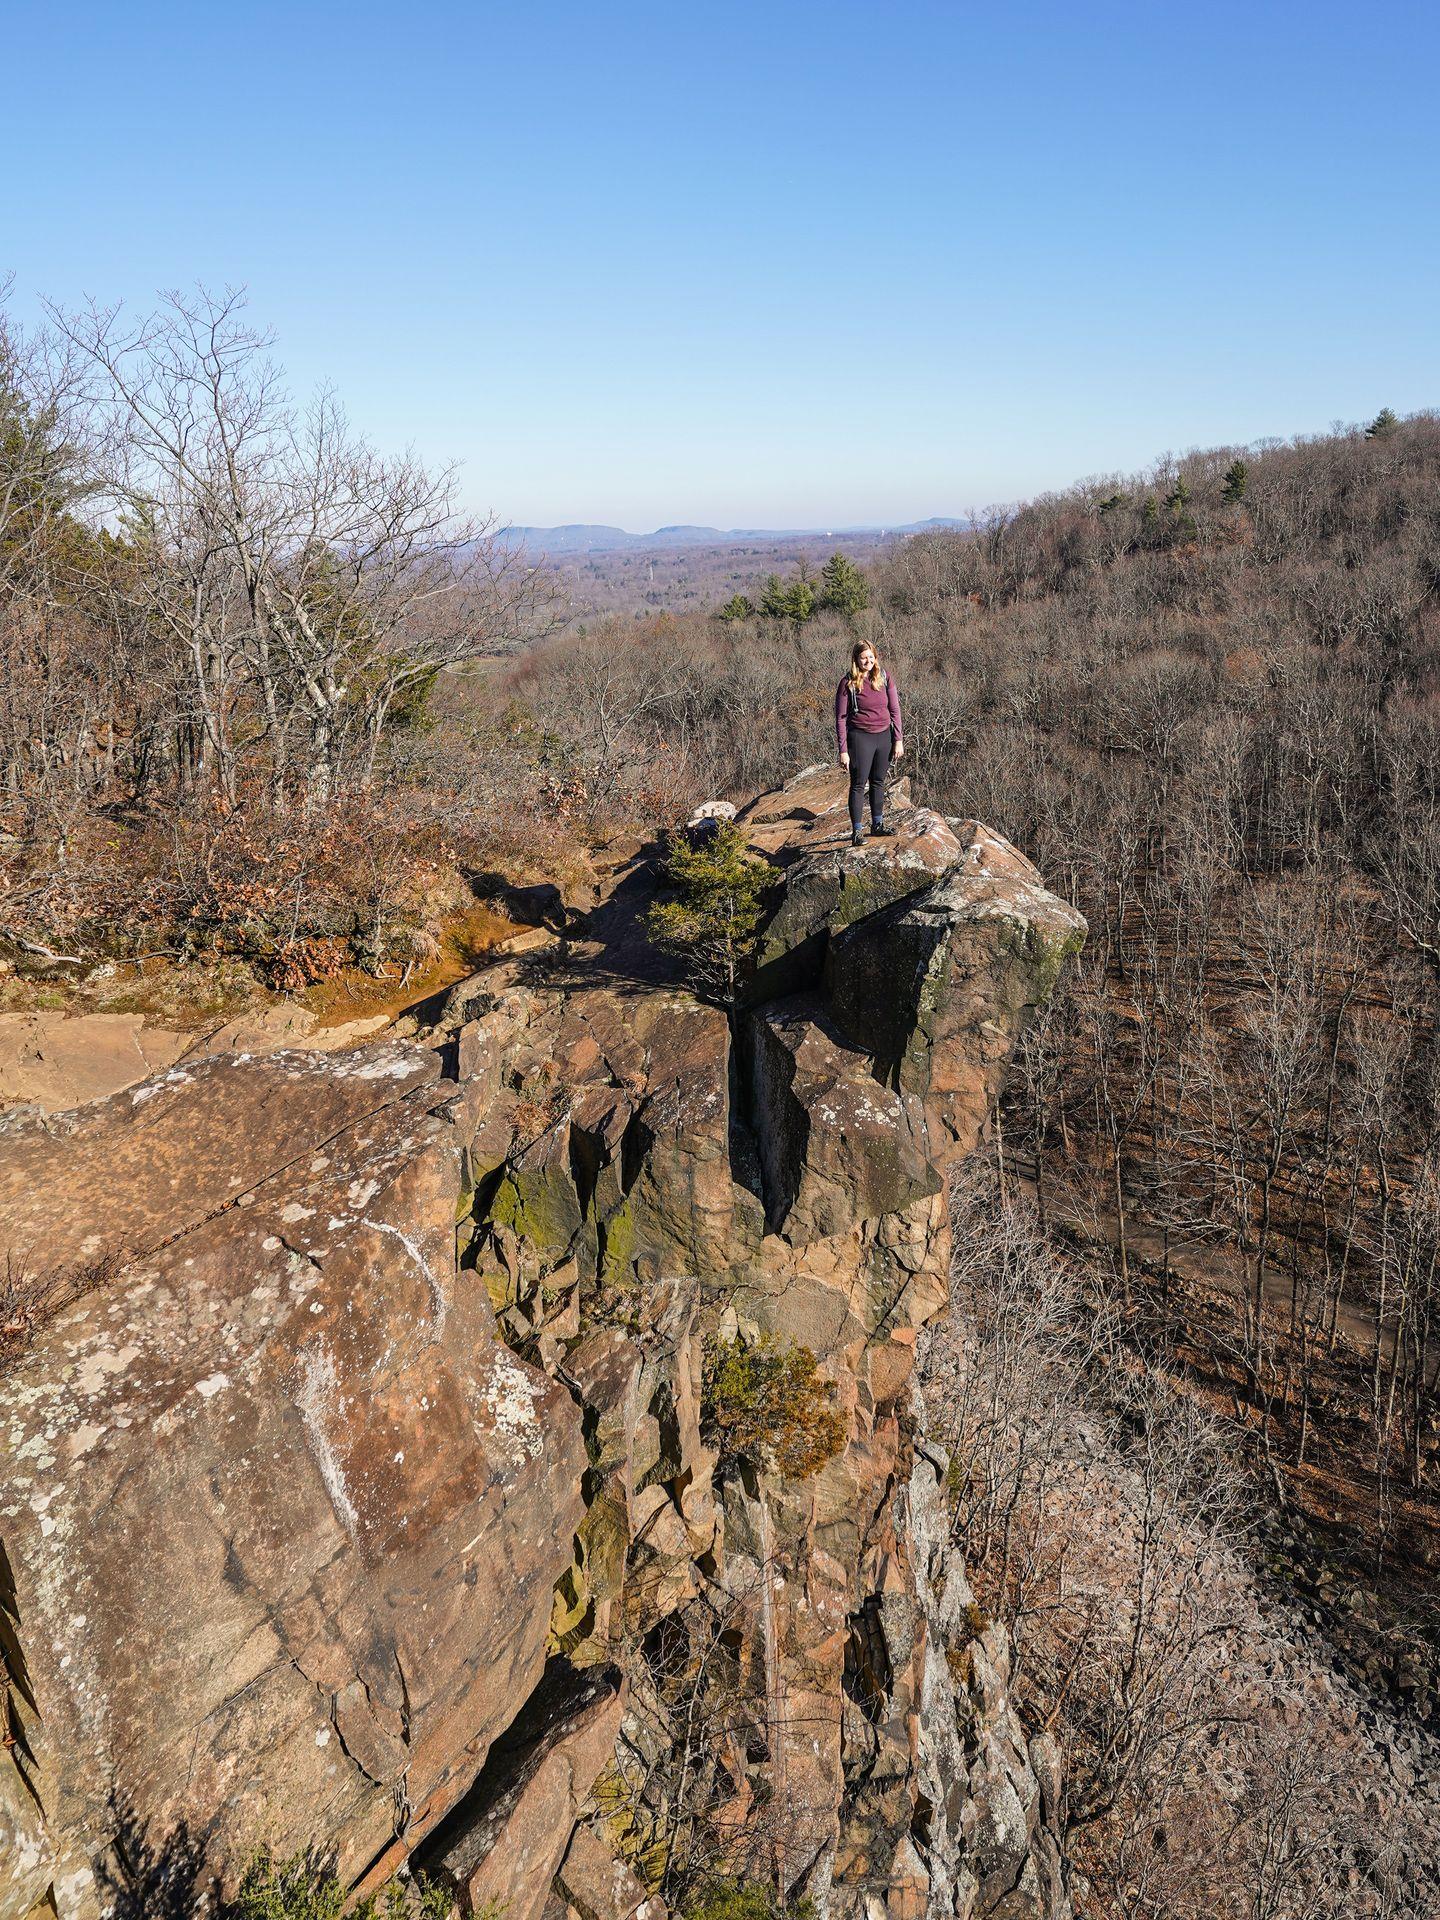 Lydia standing out on a large rock formation with a steep cliff on one side in Sleeping Giant State Park.